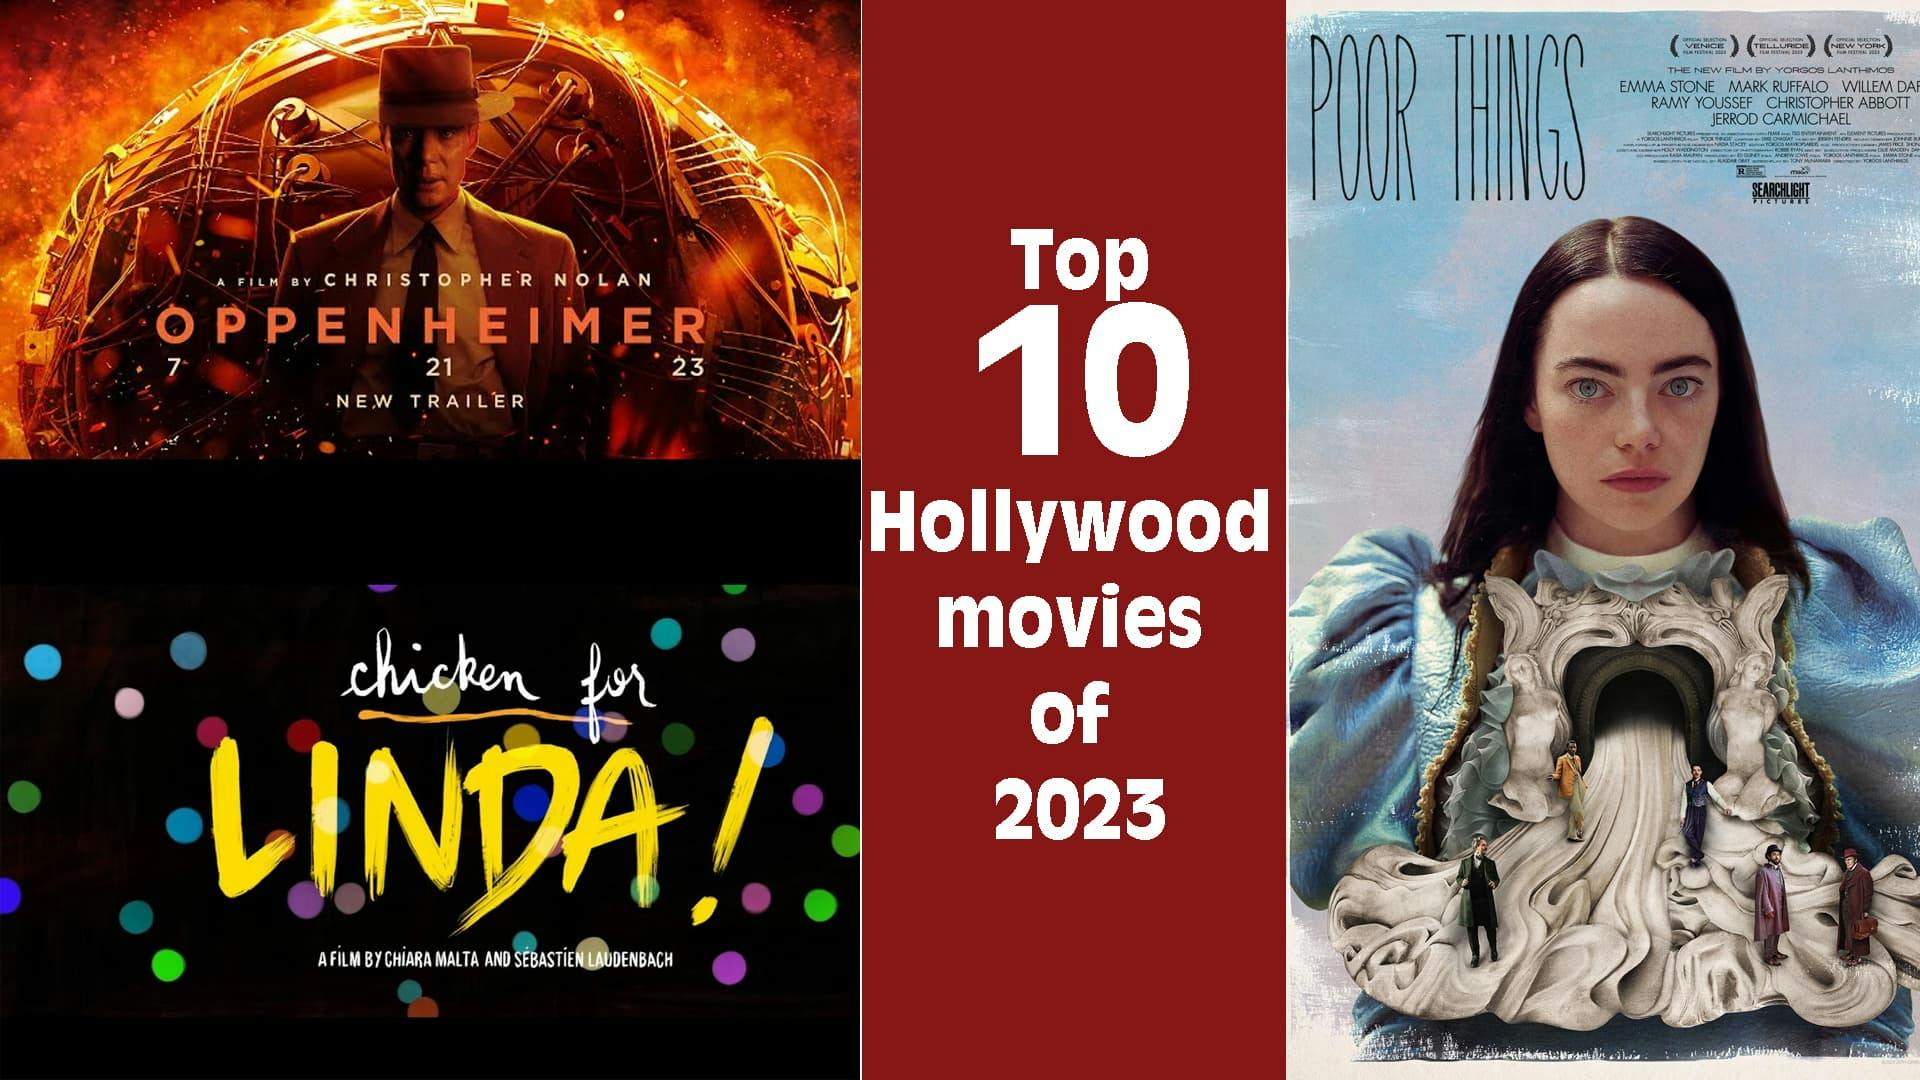 These are the 10 best Hollywood movies of 2023, with 'Poor Things' at the top.